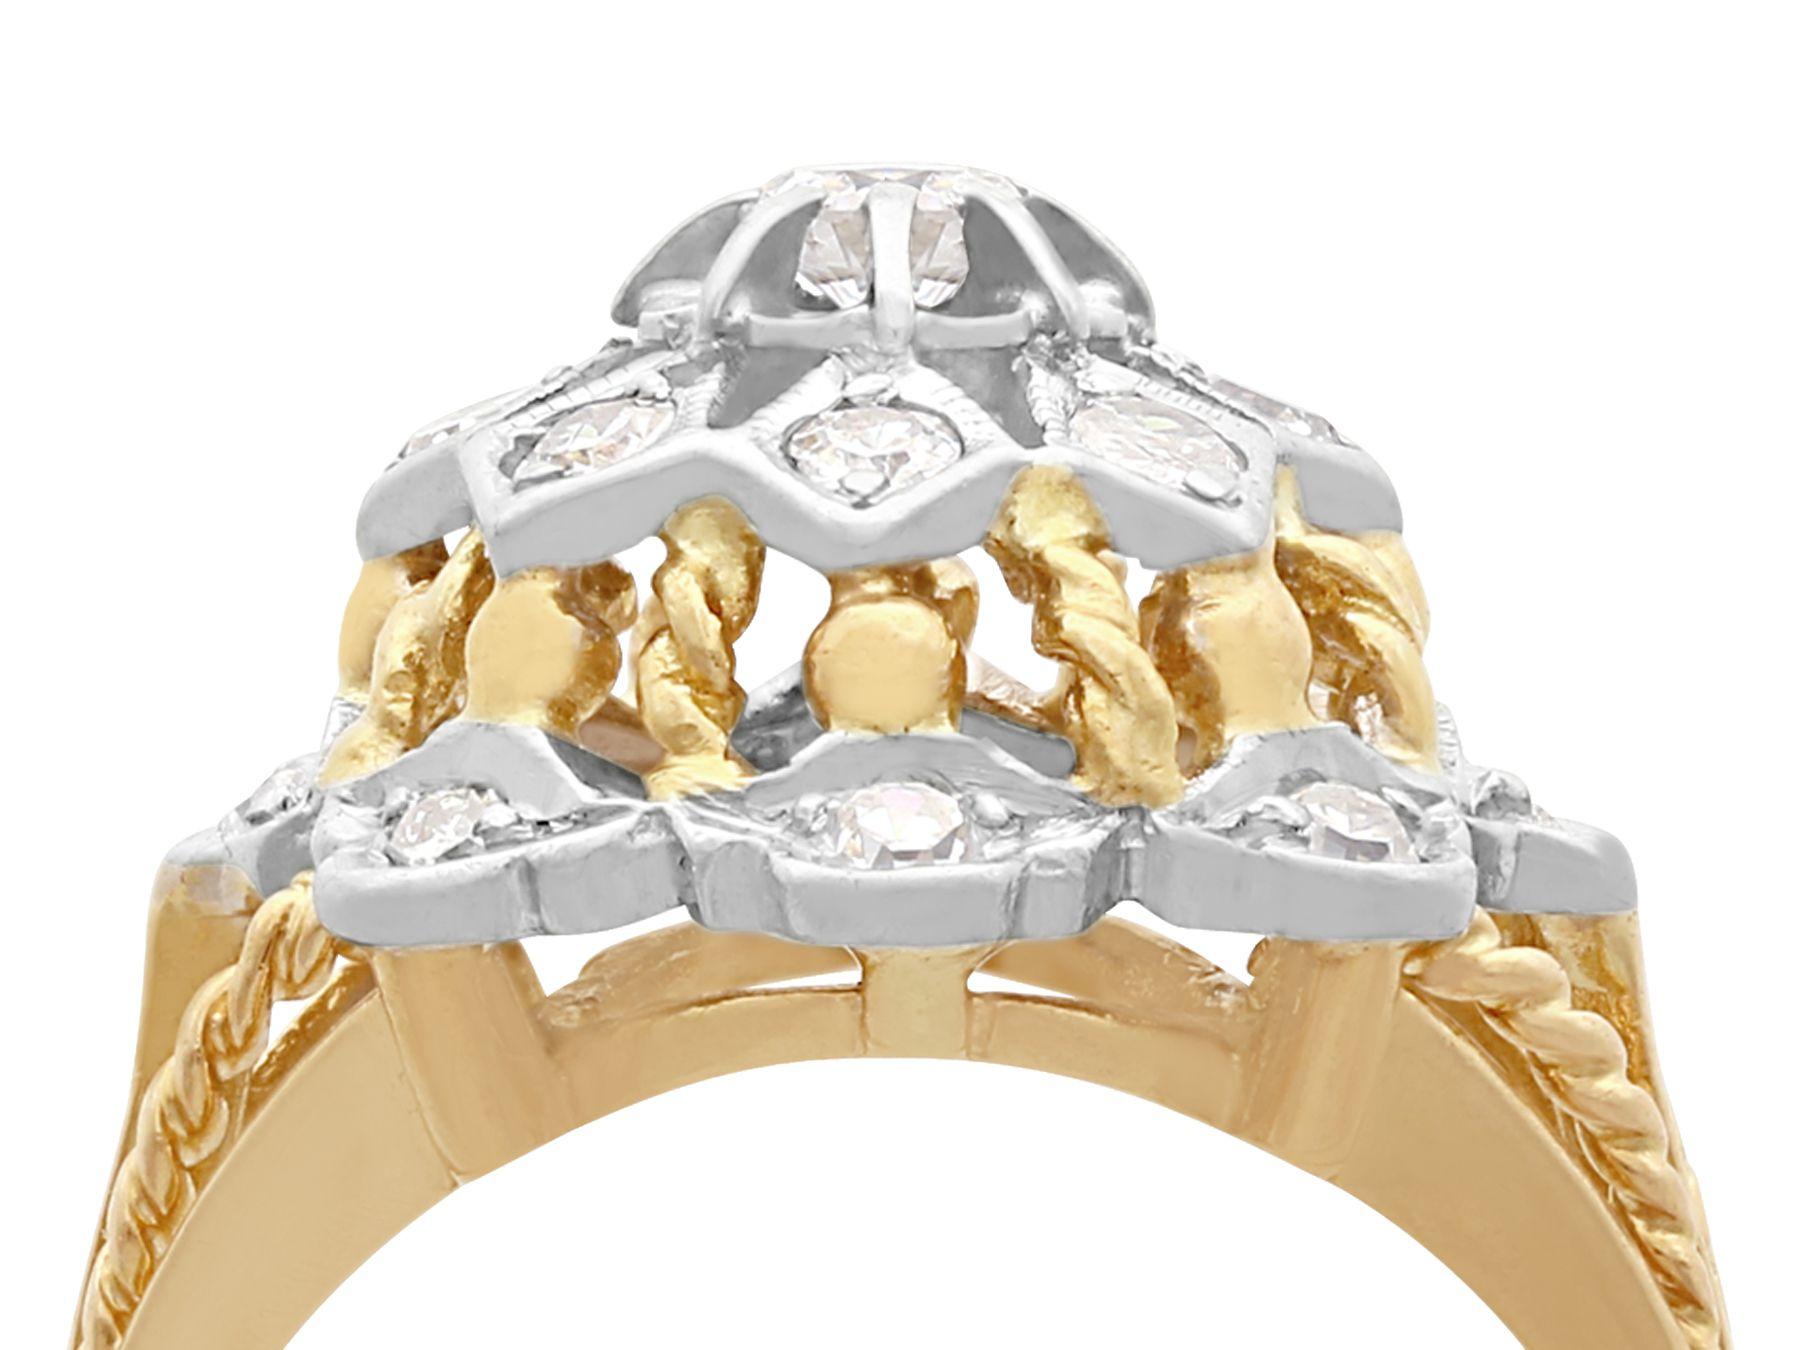 An impressive vintage European 0.70 carat diamond and 18 karat yellow gold, 18 karat white gold set cluster ring; part of our diverse antique diamond jewelry collections.

This fine and impressive vintage diamond cluster ring has been crafted in 18k